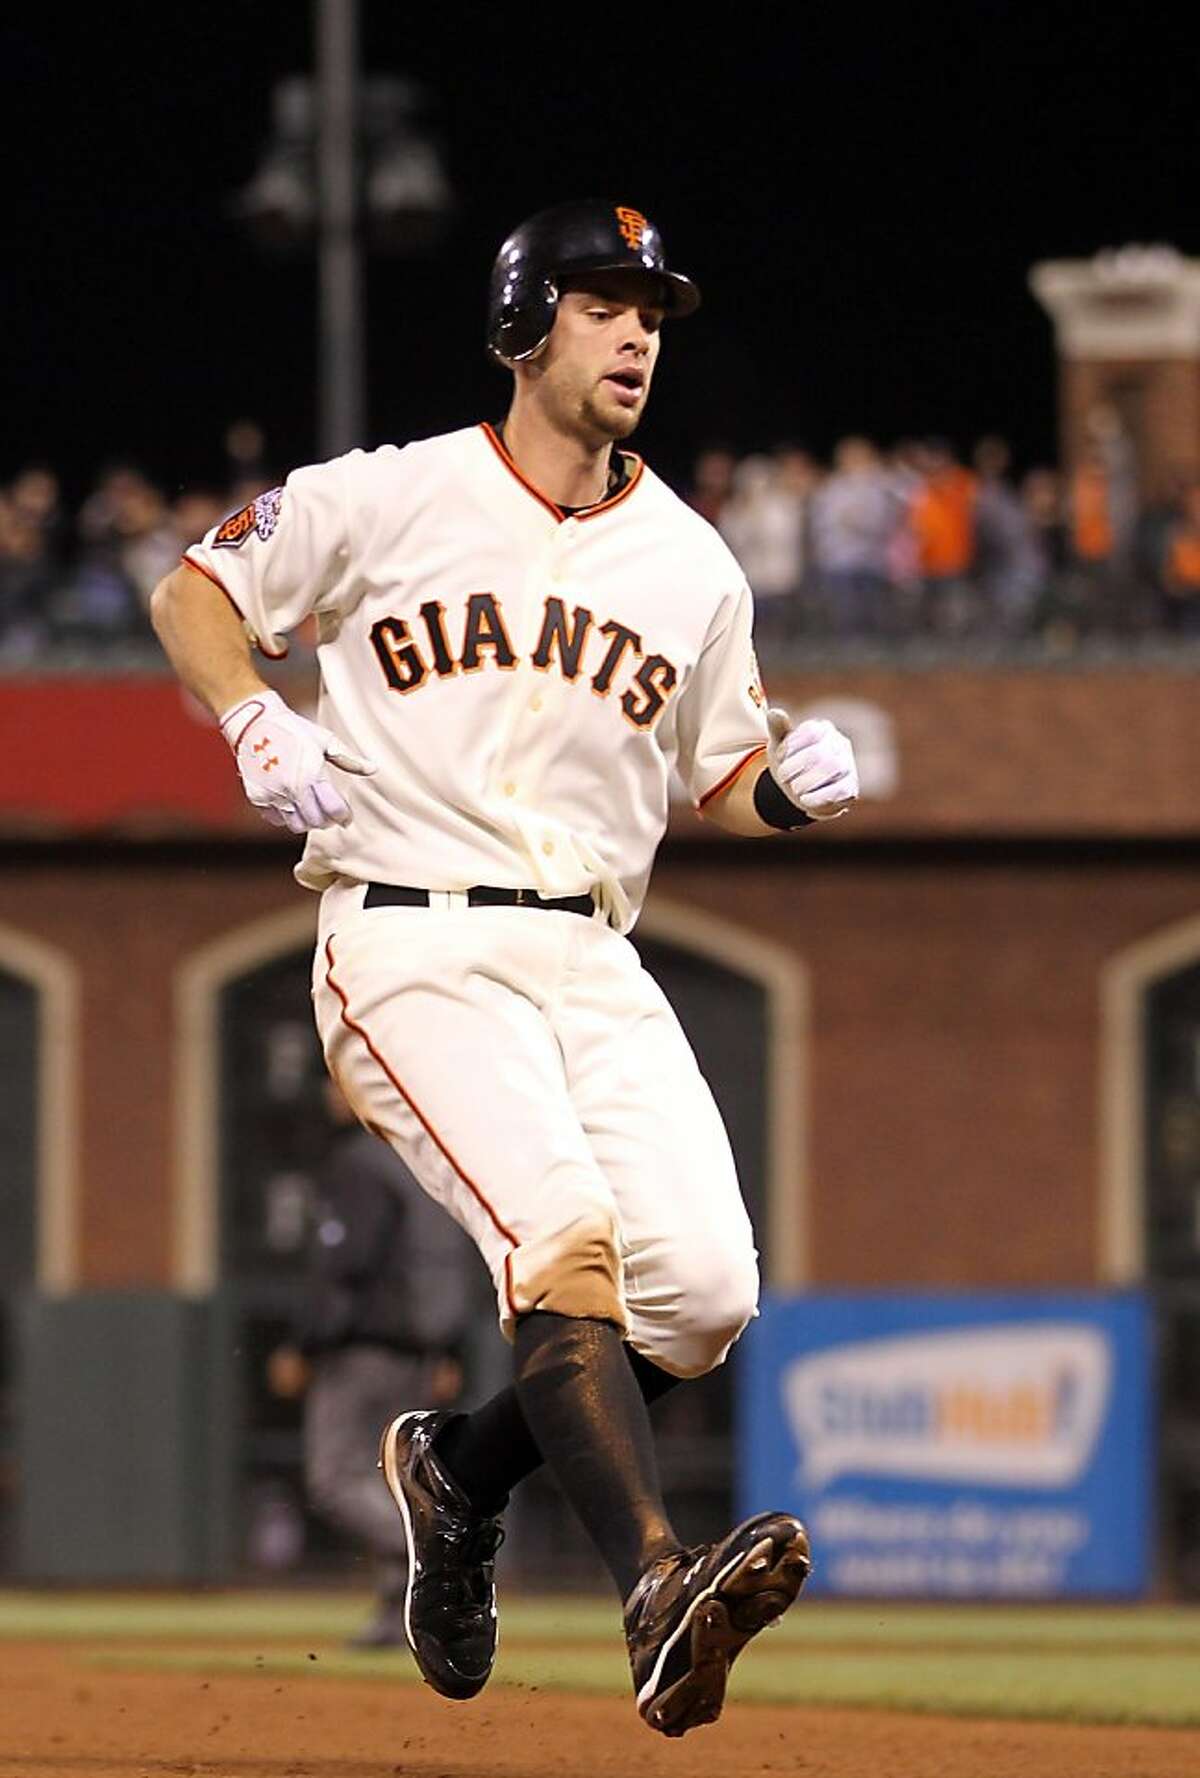 SAN FRANCISCO, CA - AUGUST 24: Brandon Belt #9 of the San Francisco Giants runs to third base for a stand up triple in the fifth inning against the San Diego Padres at AT&T Park on August 24, 2011 in San Francisco, California. (Photo by Ezra Shaw/Getty Images)